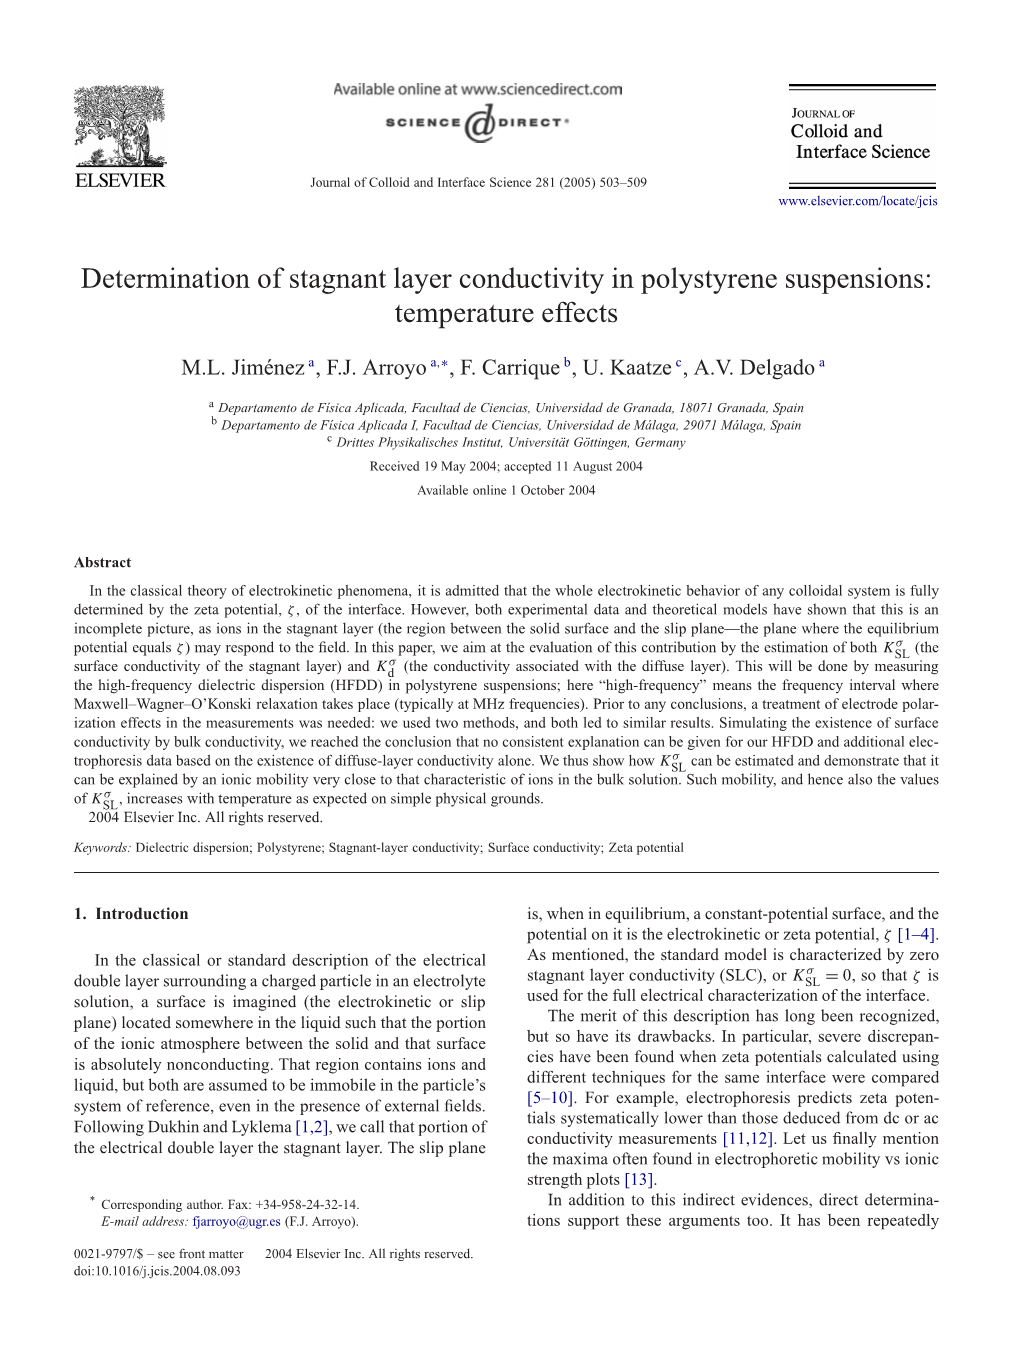 Determination of Stagnant Layer Conductivity in Polystyrene Suspensions: Temperature Effects